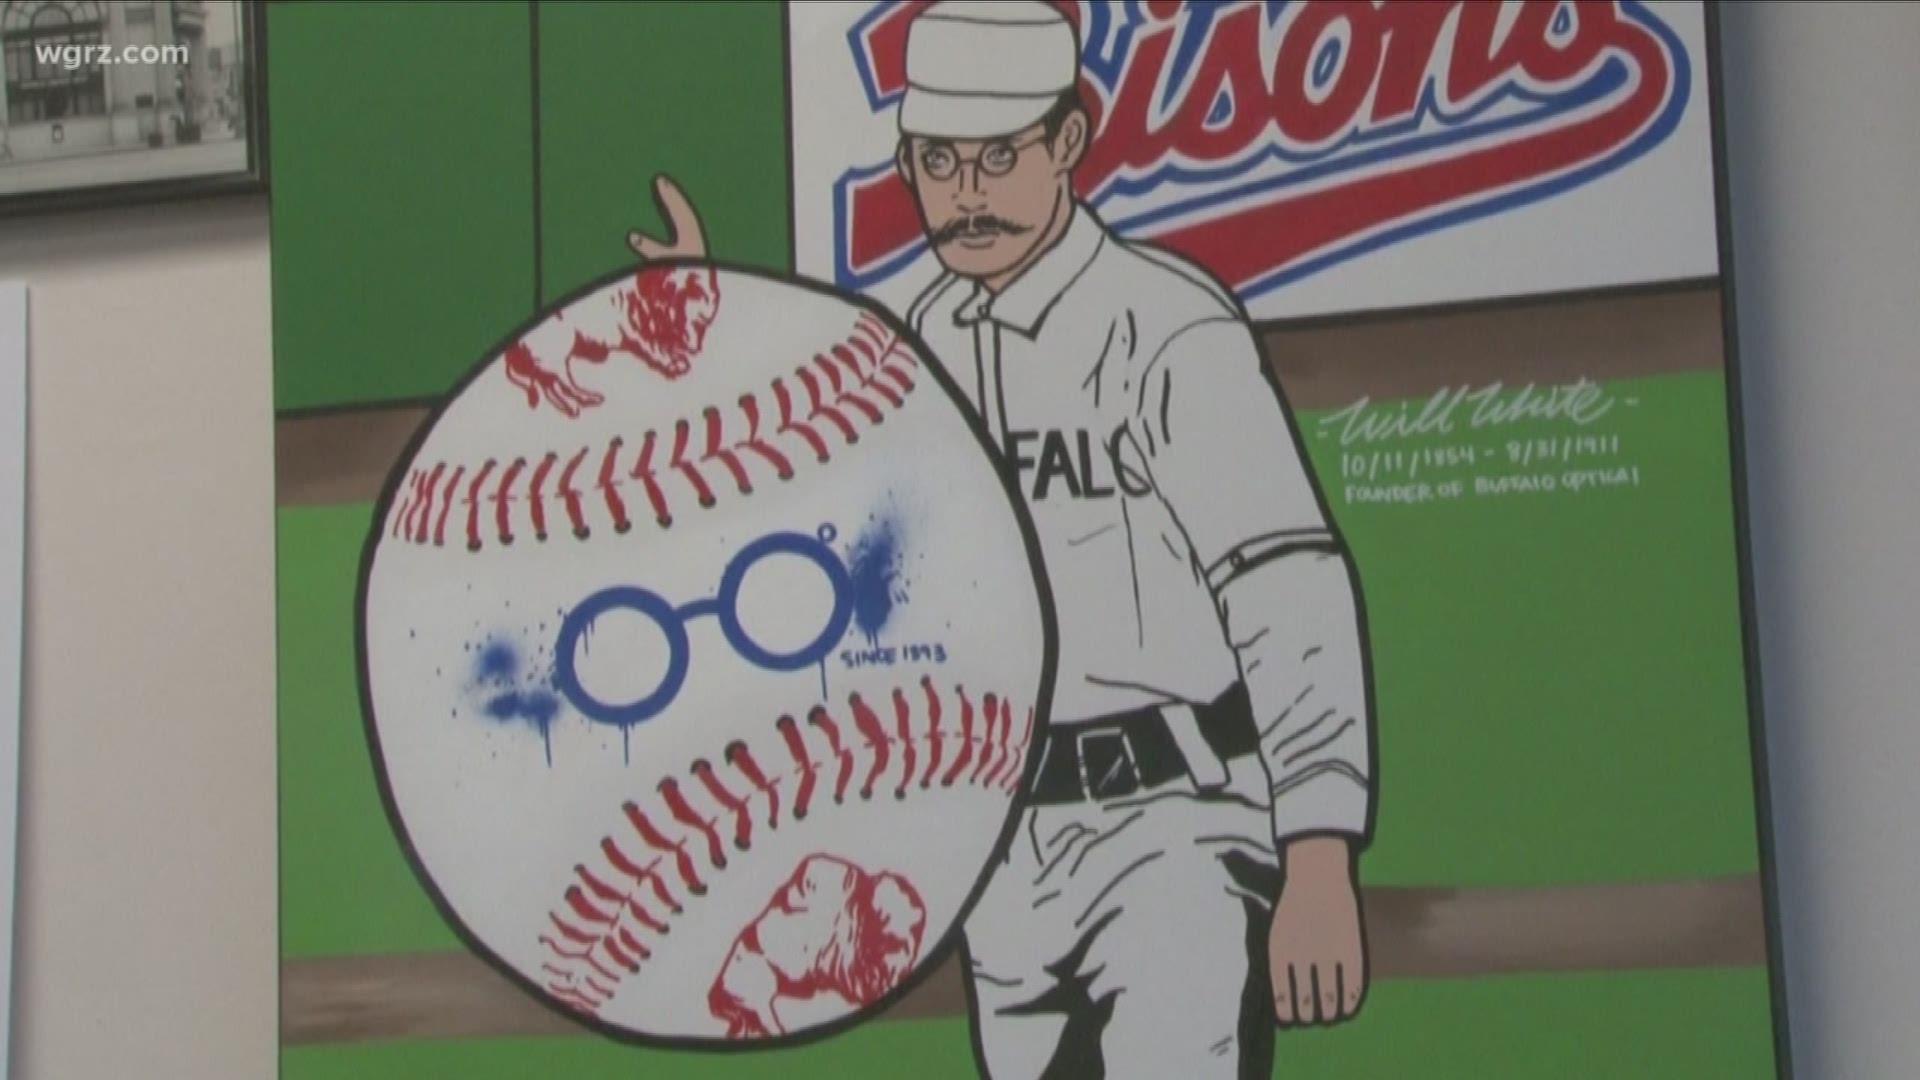 Will White opened Buffalo Optical 126 years ago, but had already made his mark on the baseball diamond by being the first pro player to wear glasses on the field.